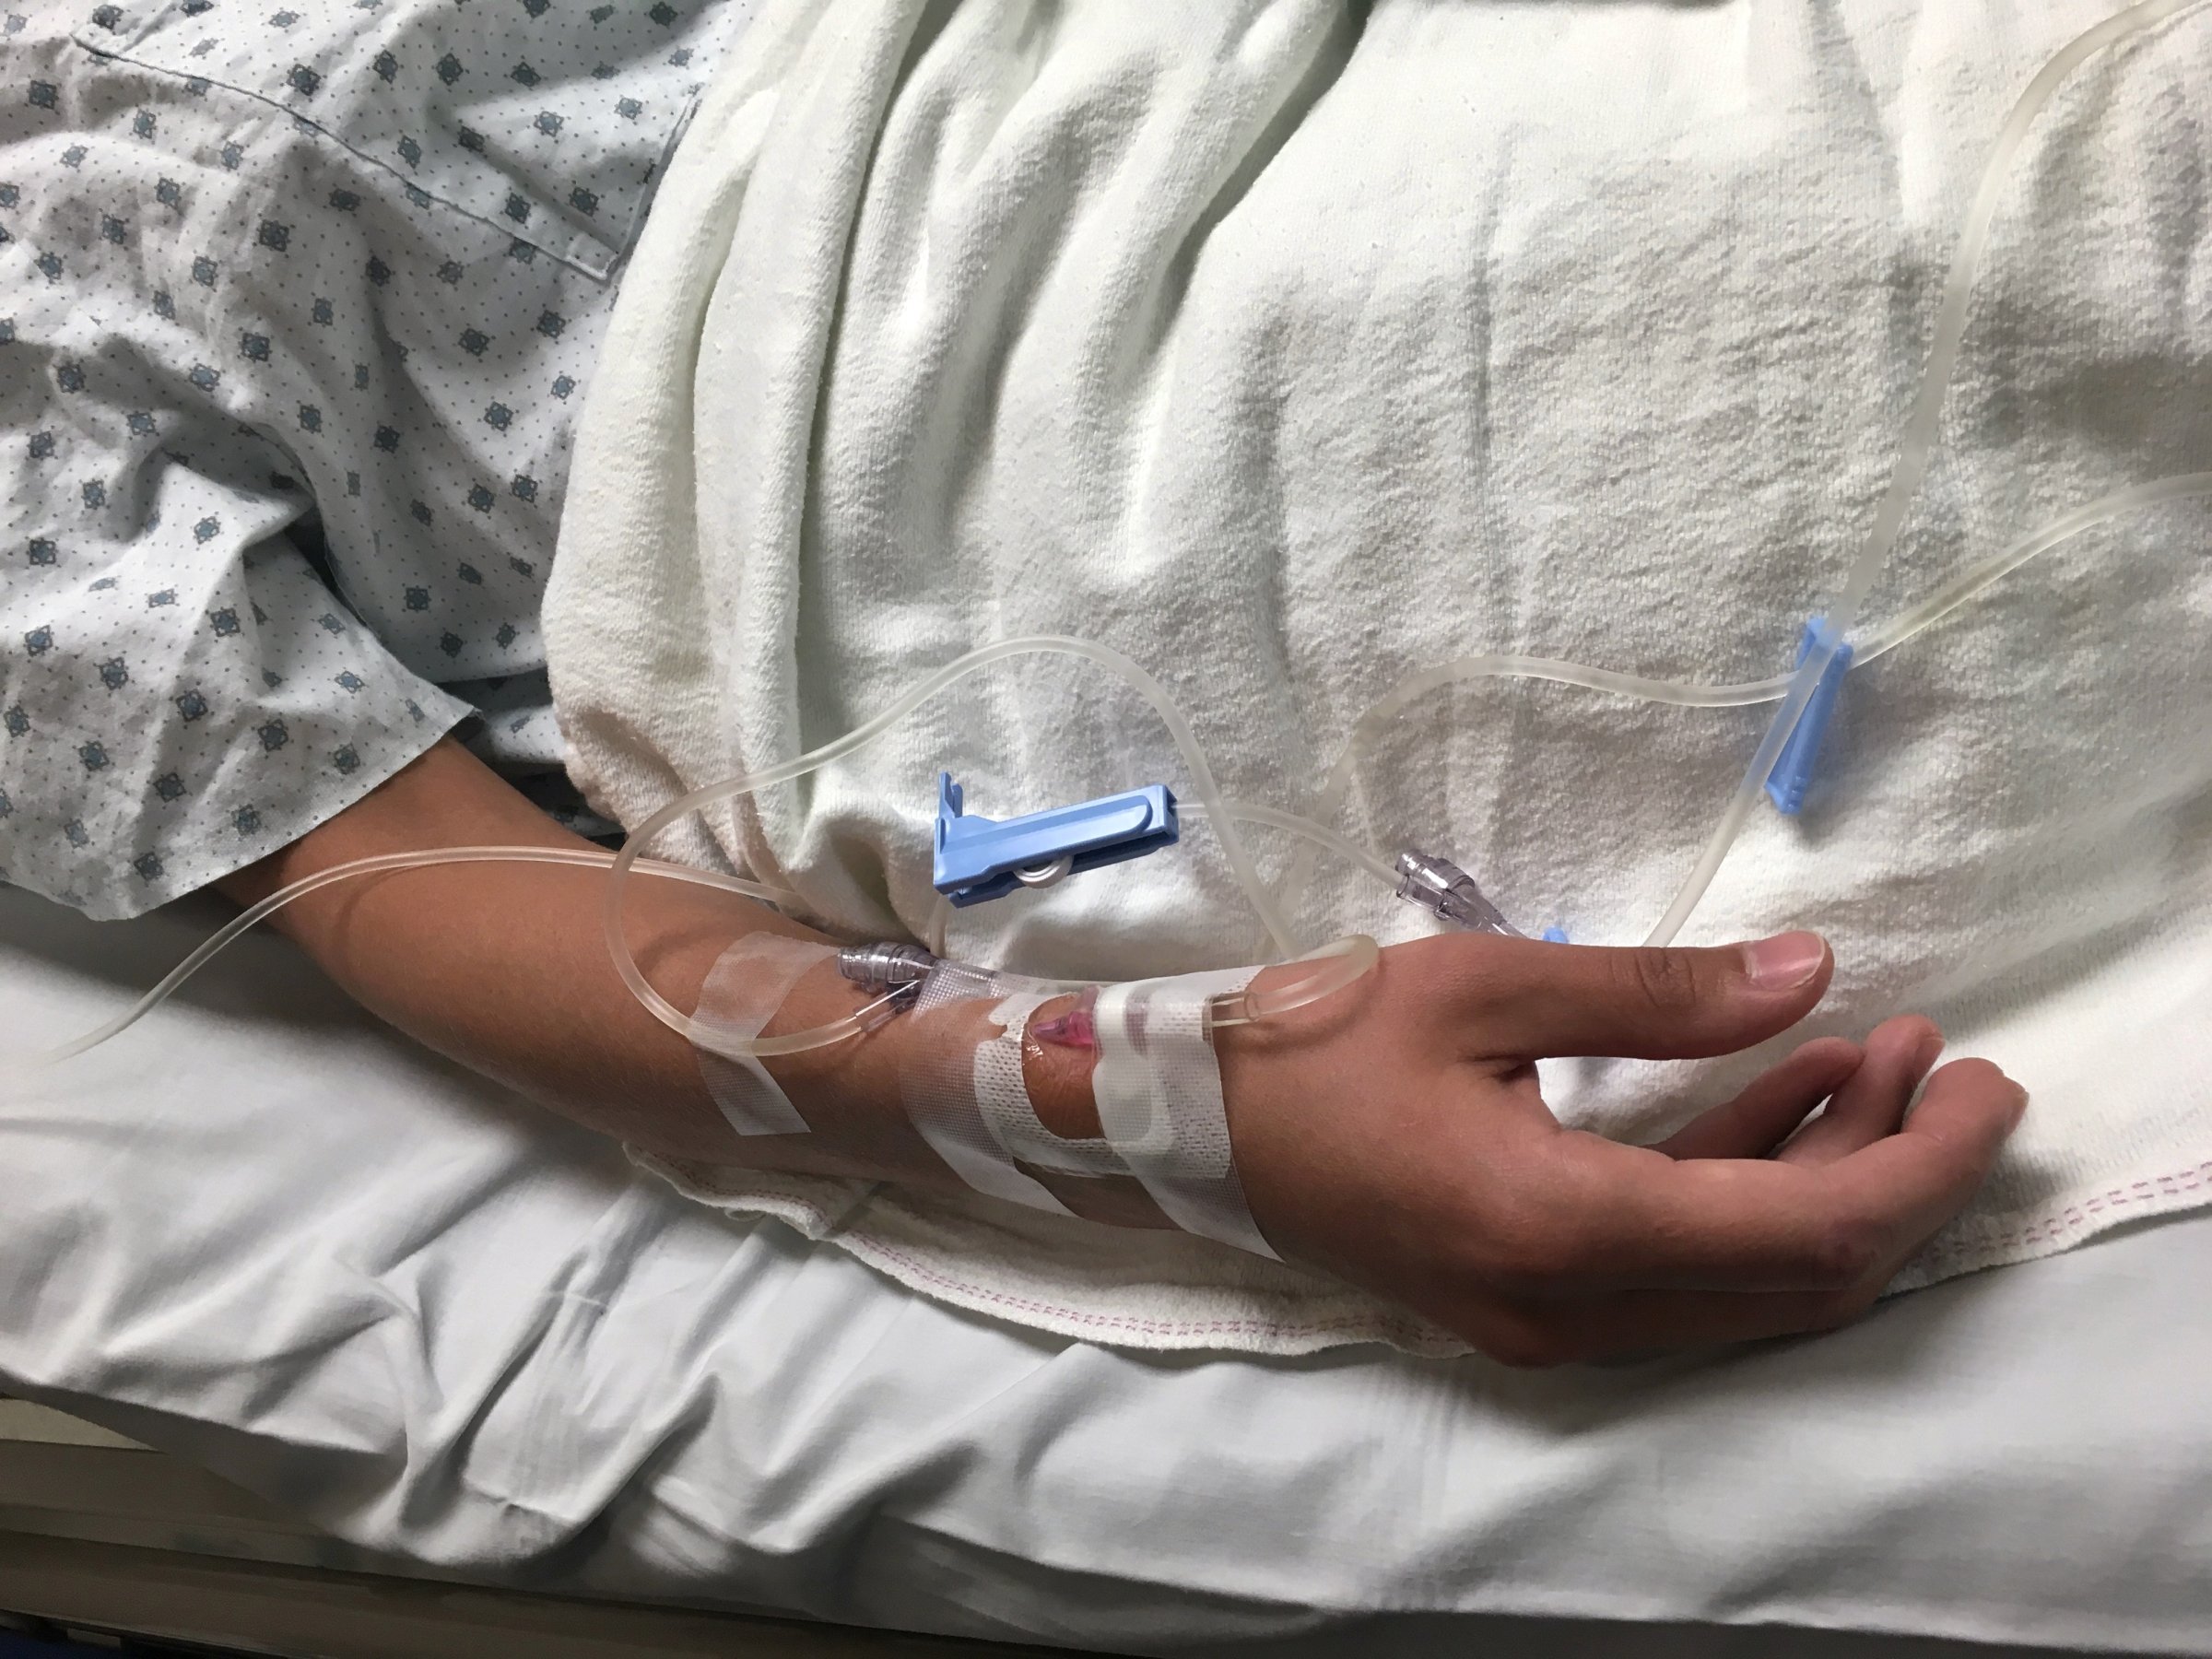 Patient in Hospital bed with IV in arm